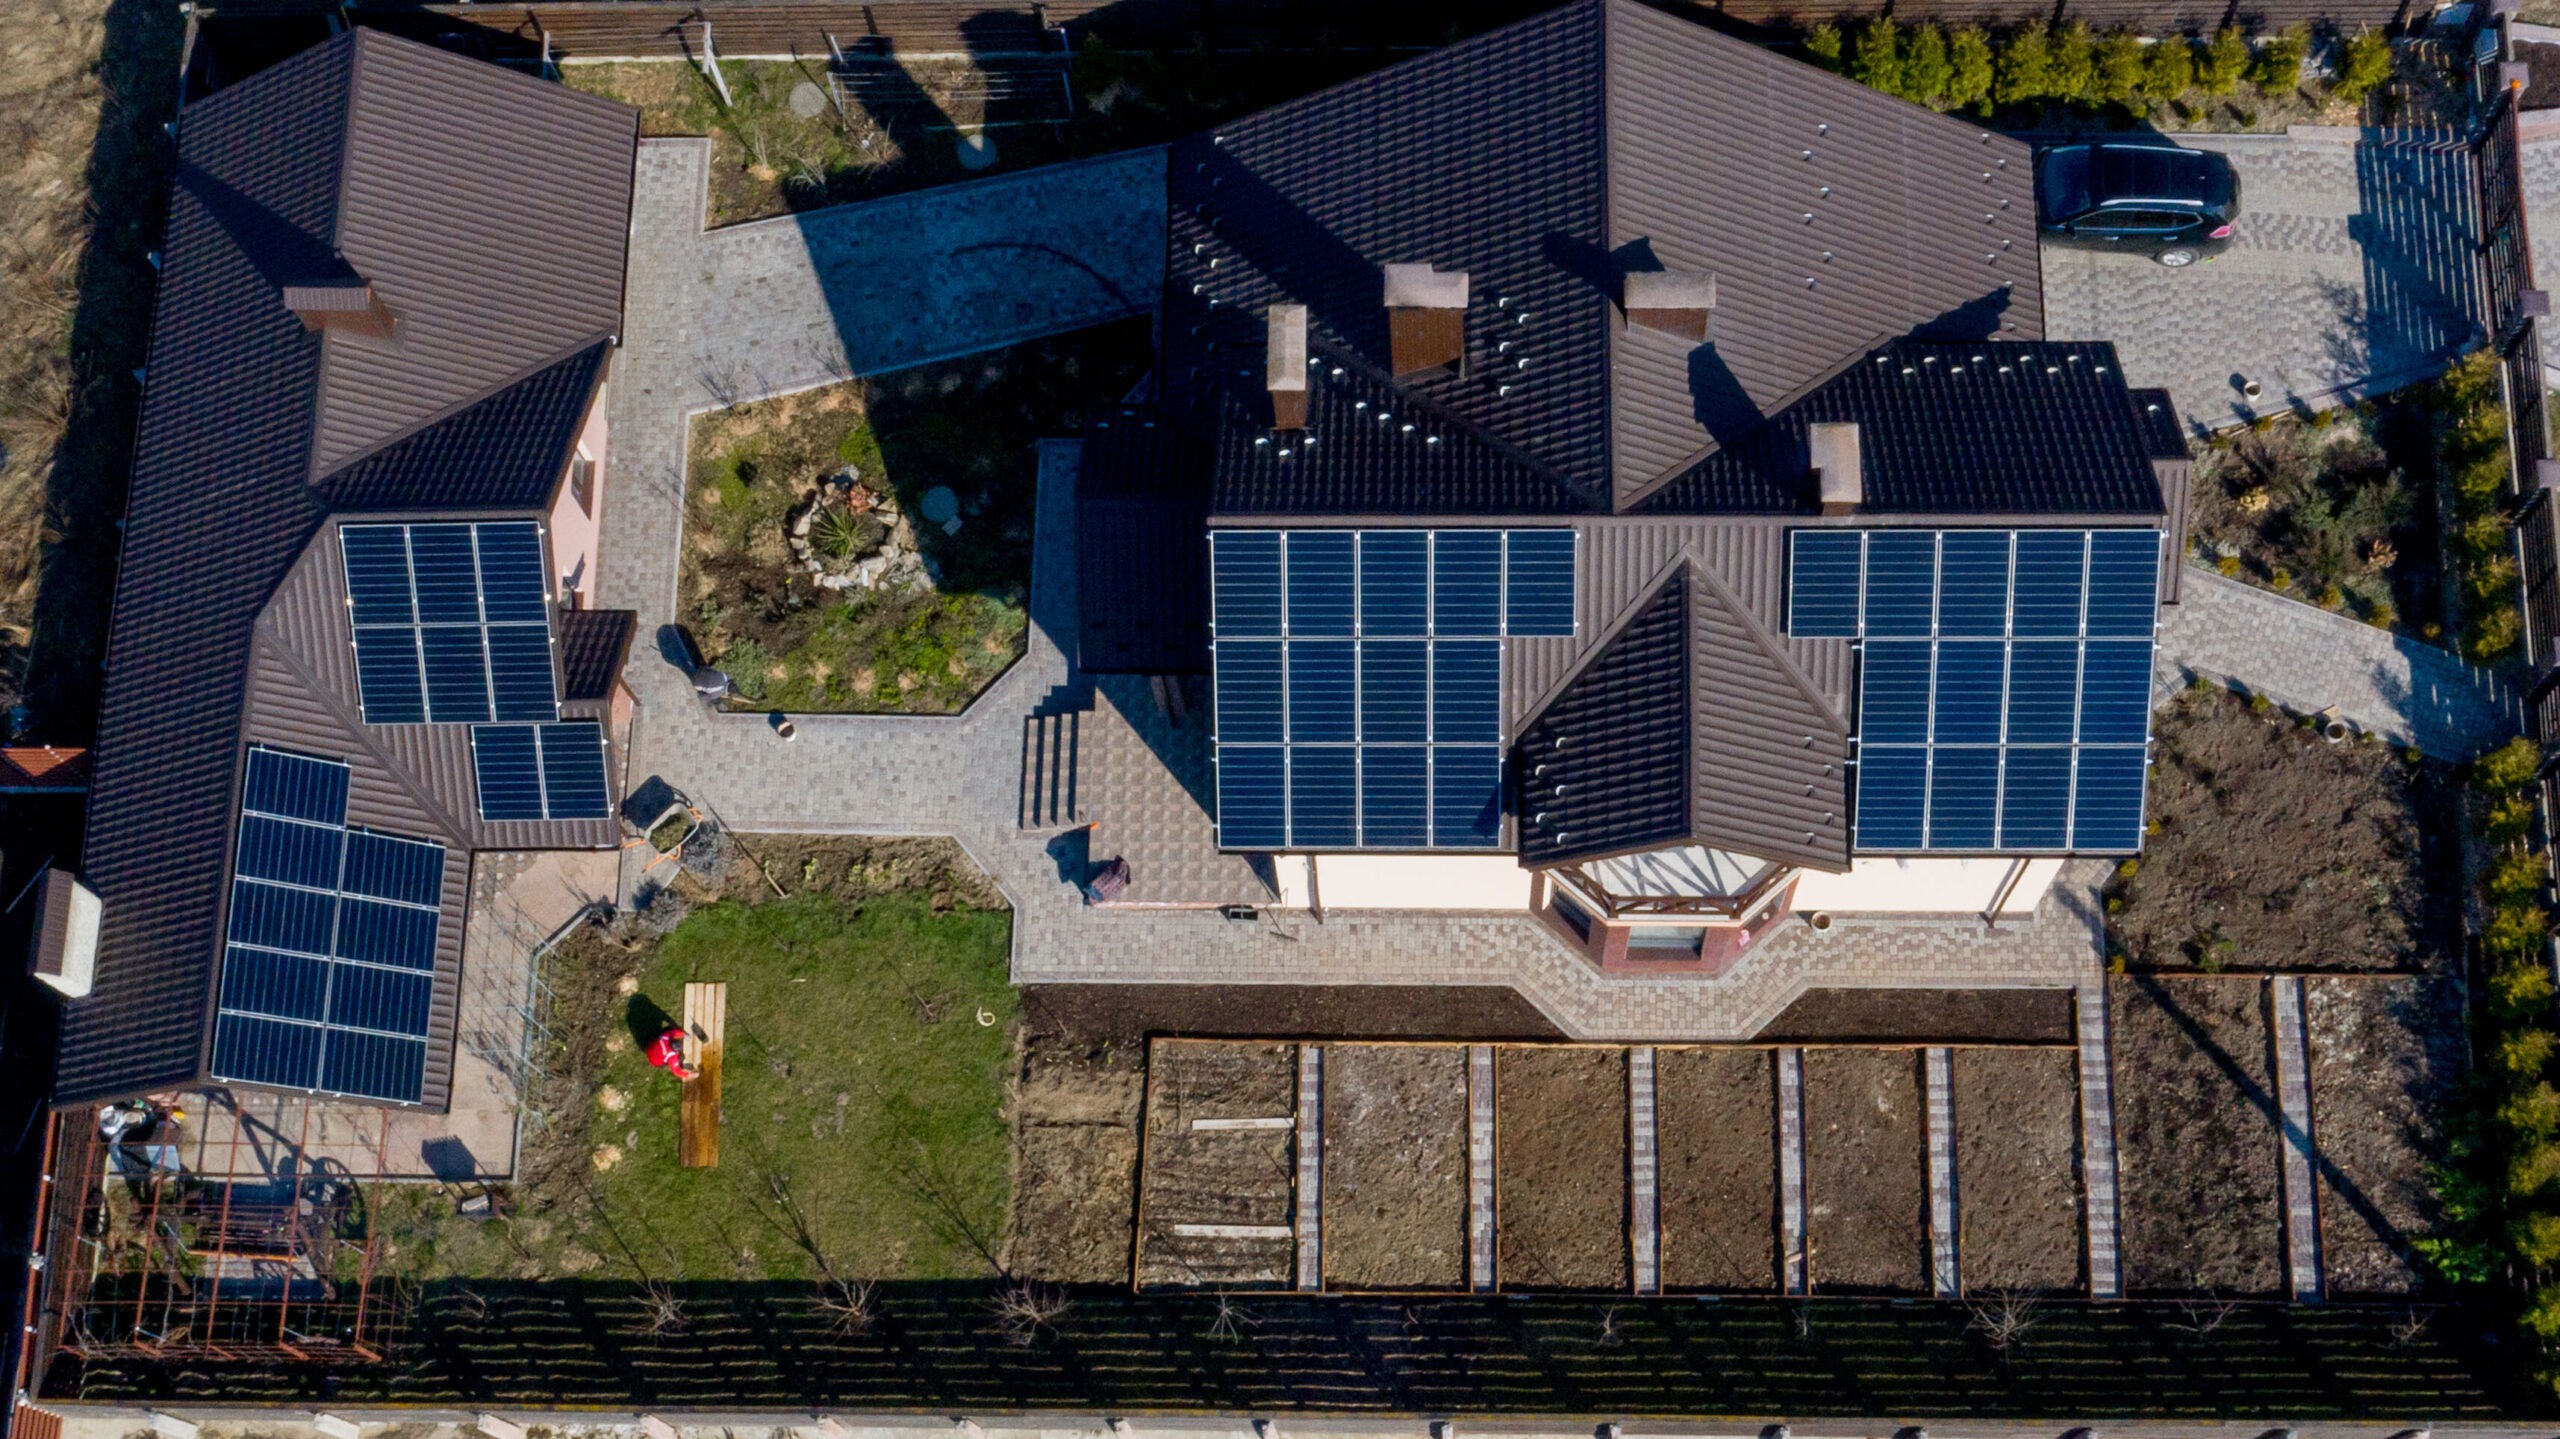 Aerial top view of a house with paved yard with green grass lawn with concrete foundation floor that has solar panels covering some of the roof. 